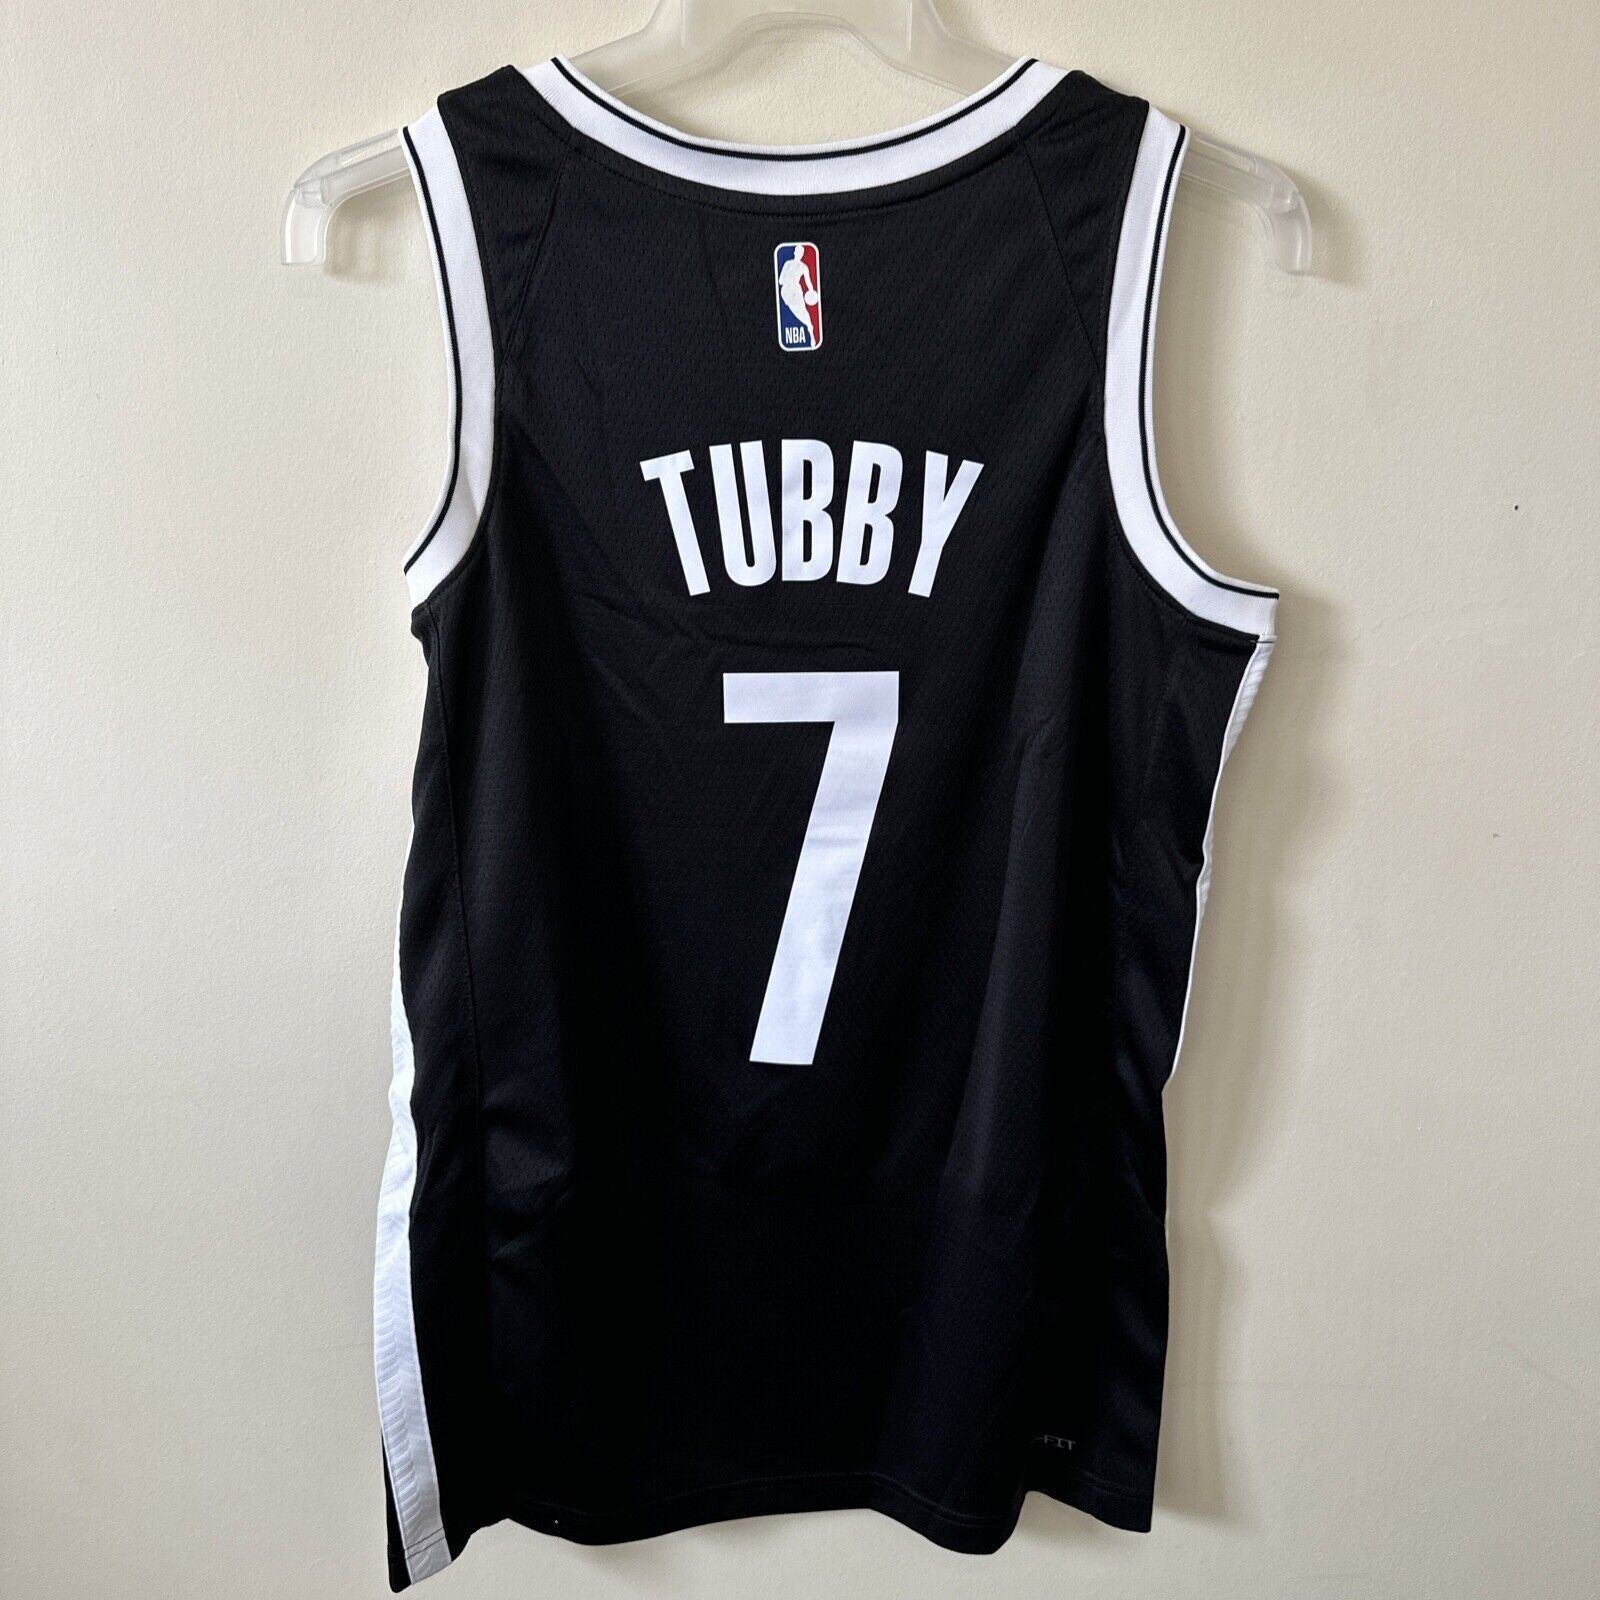 Nike NBA Brooklyn Nets Icon Edition Jersey TUBBY 7 Men’s Small